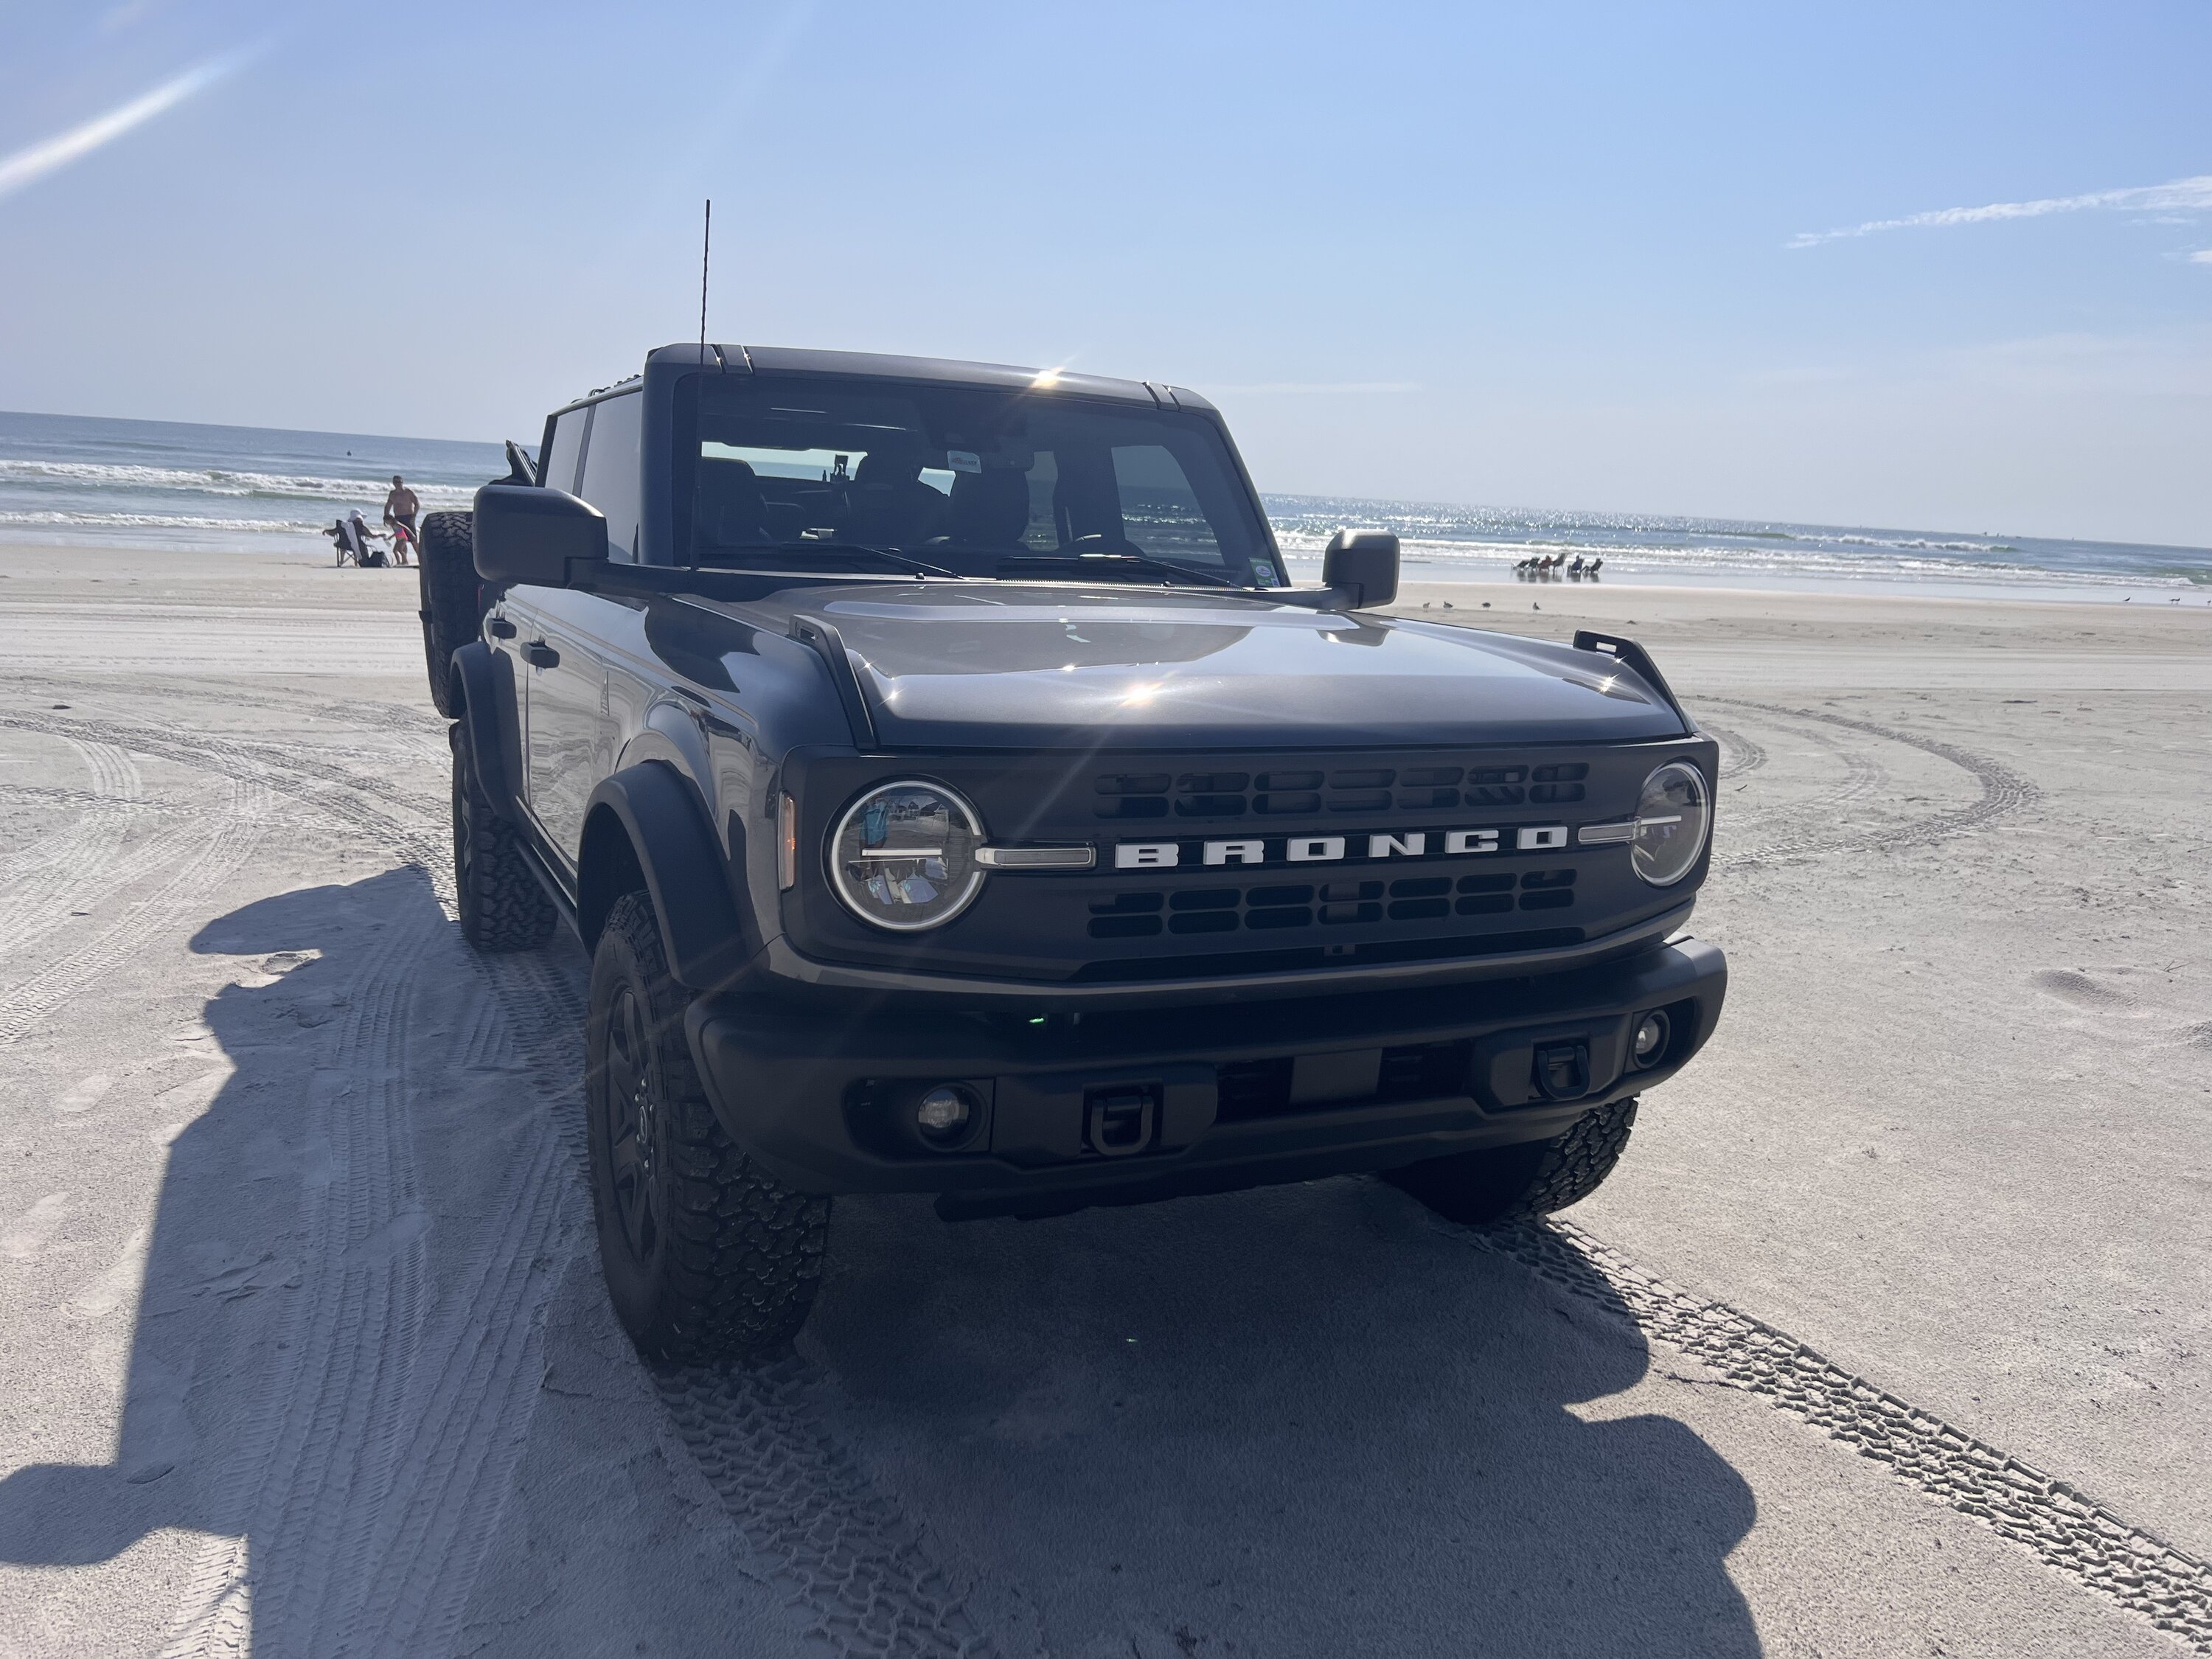 Ford Bronco Let’s see those Beach pics! IMG_3312